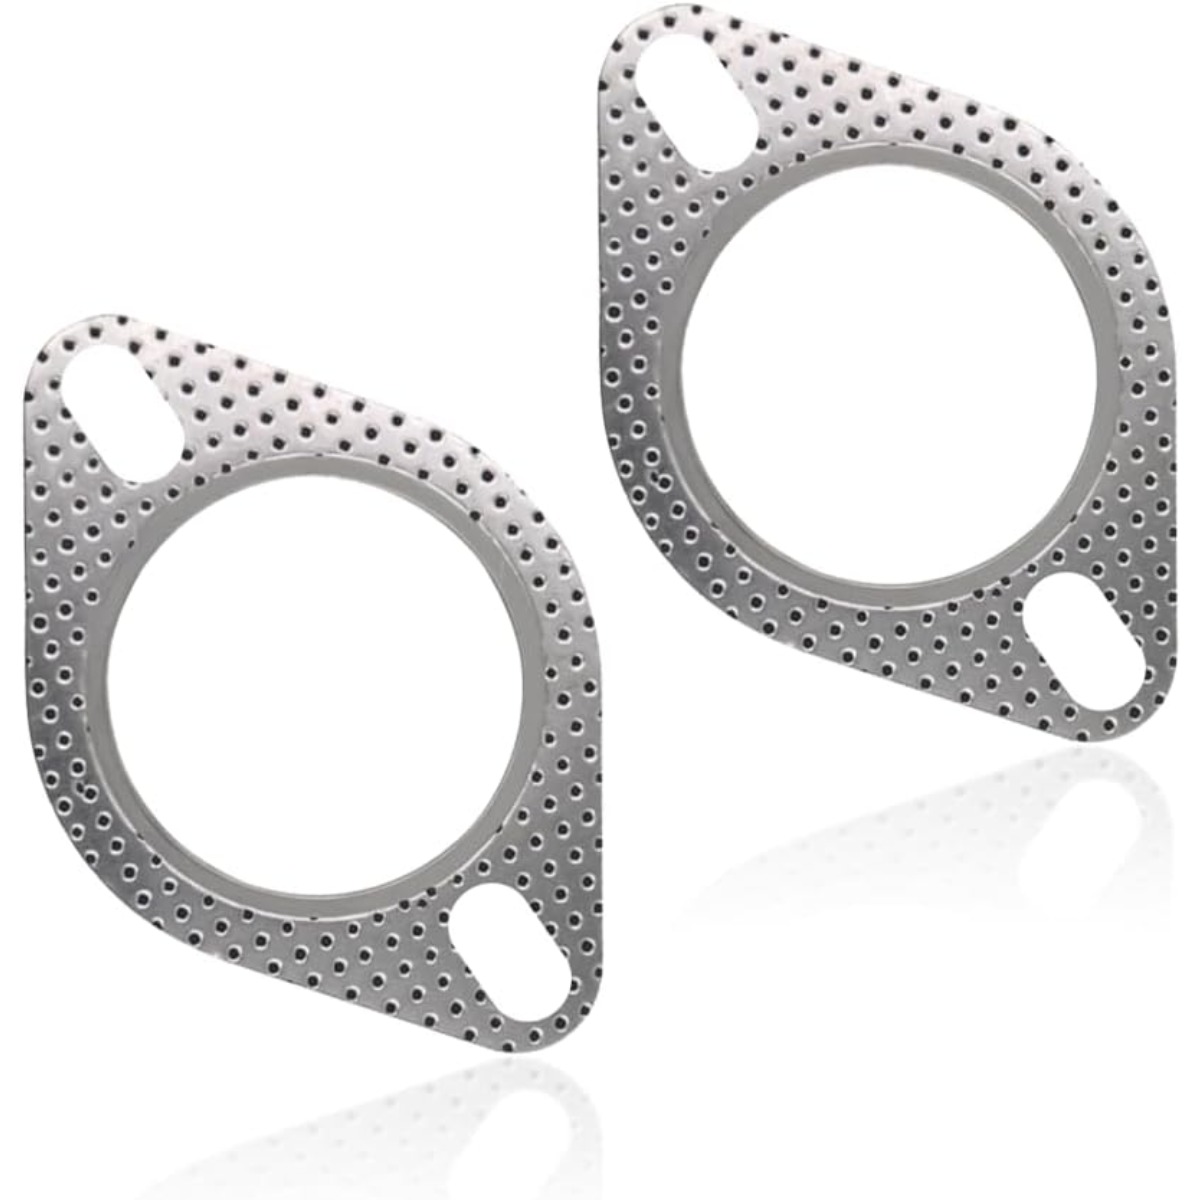  2 PCS Car Exhaust Gasket,2.5 2-Bolt Exhaust Flange Gasket  Replacement OEM#120-06310-0002,Standard Exhaust Manifold Gasket Car  Accessories Made of High Temp Gasket Material(2.5inch) : Automotive